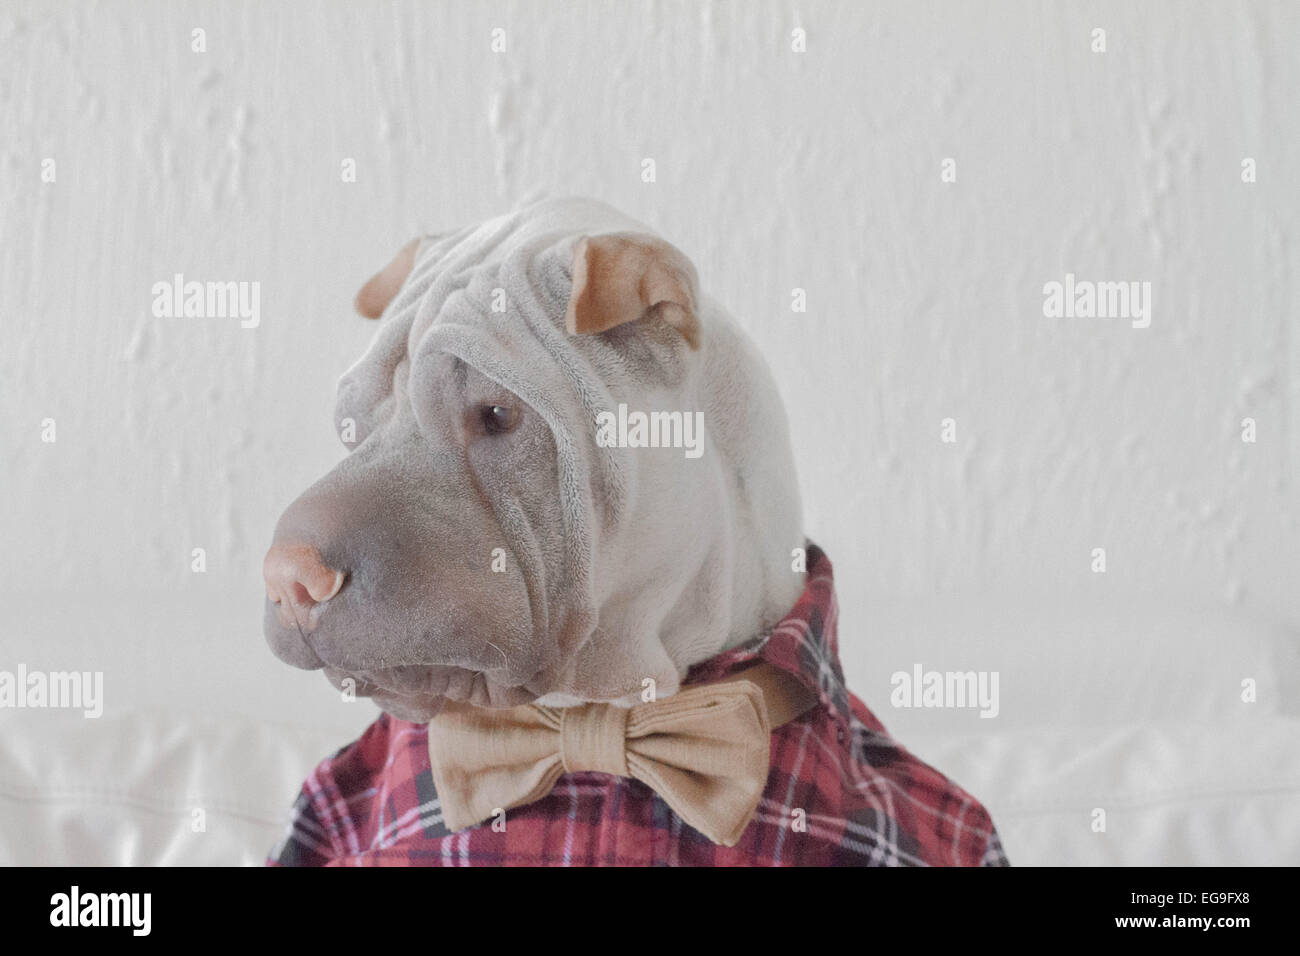 Portrait of shar pei dog dressed in a shirt and bow tie Stock Photo